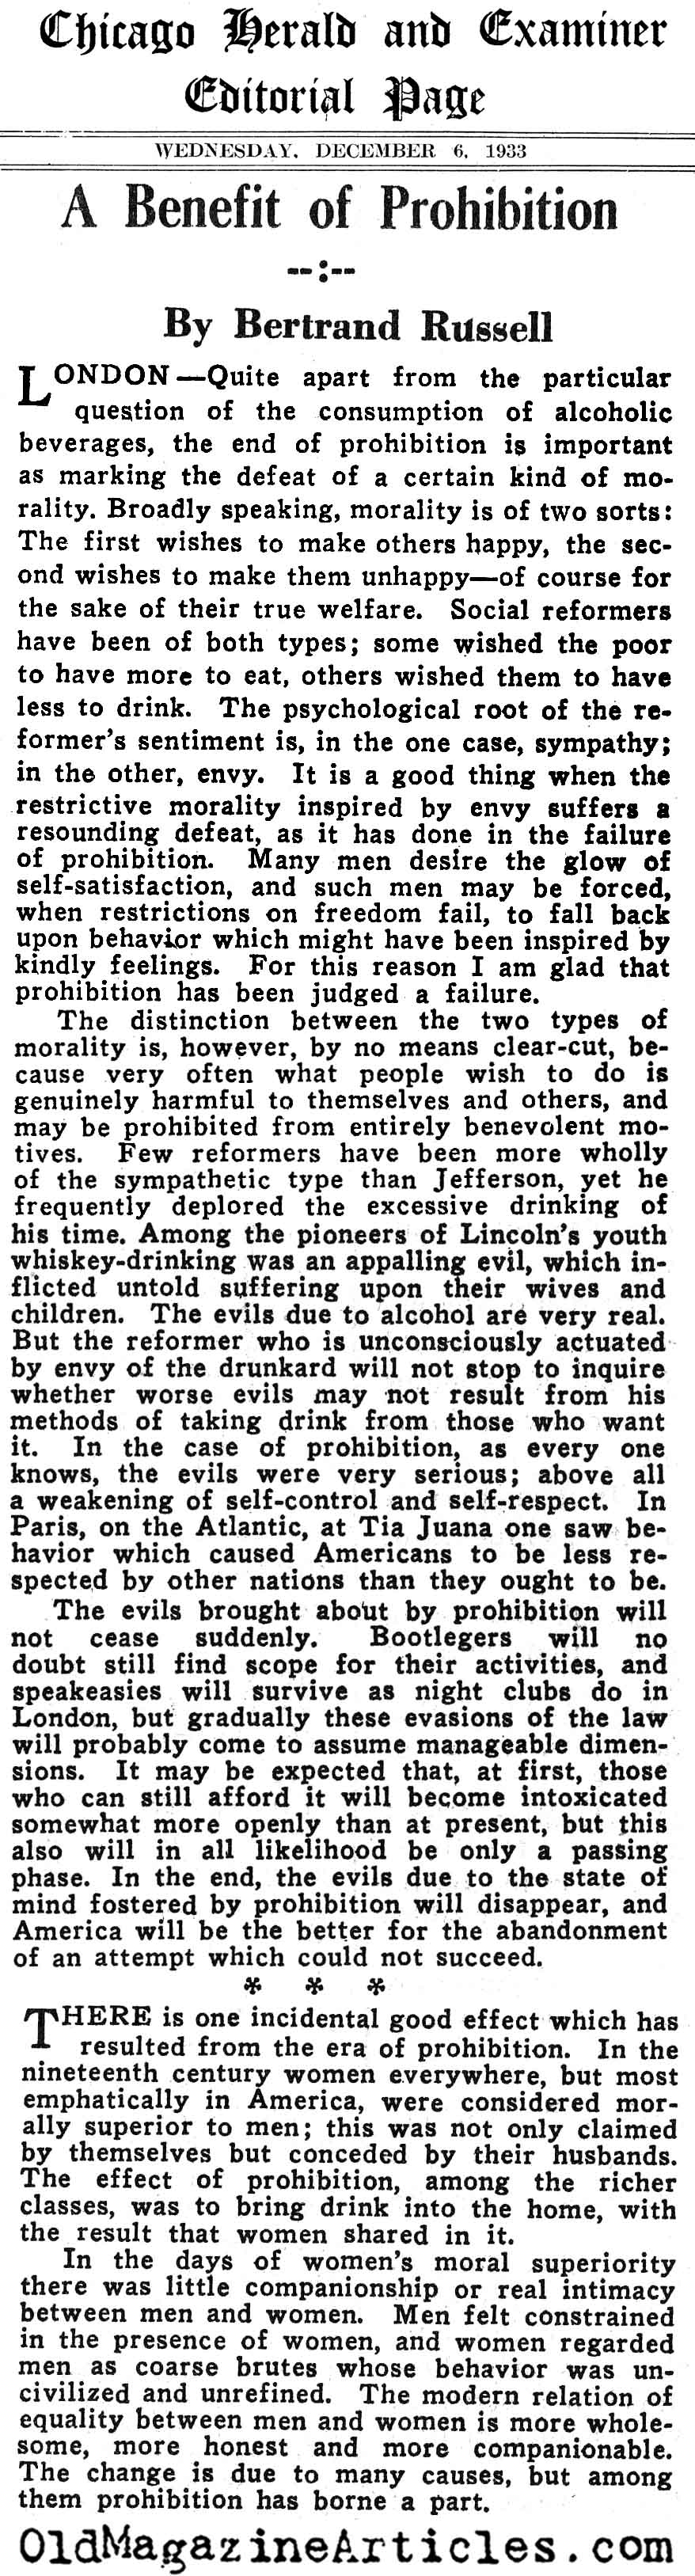 The Good and Bad in Prohibition (Chicago Herald & Examiner, 1933)